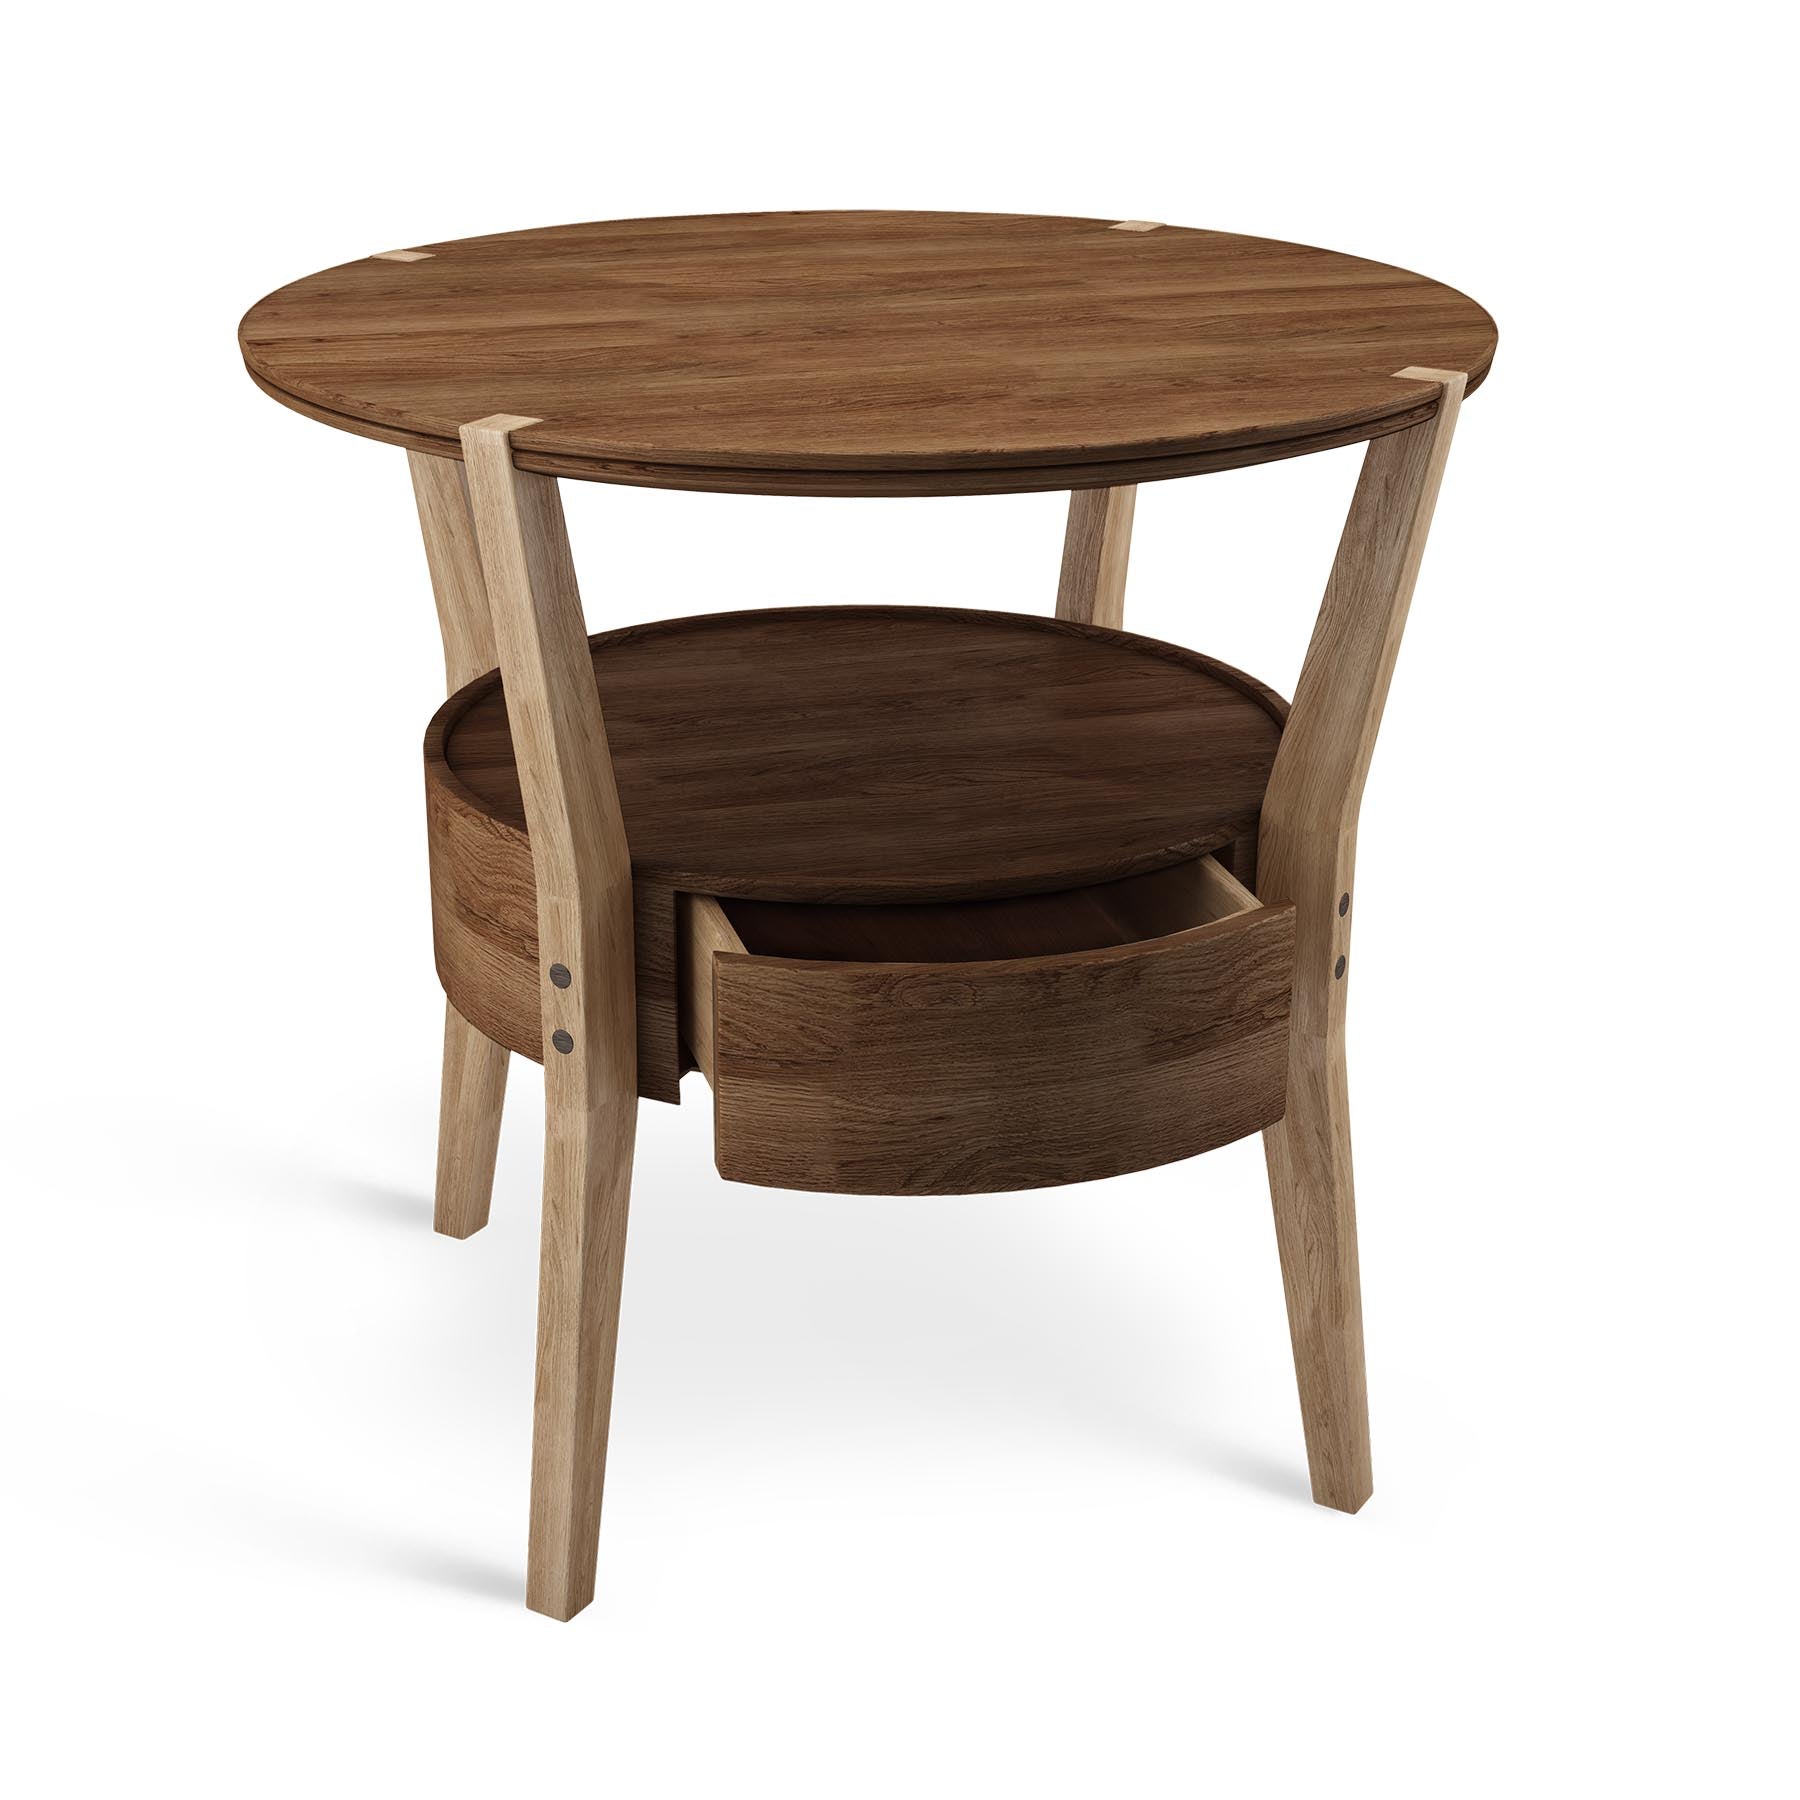 CROMWELL - SIDE TABLE | Modern Furniture + Decor